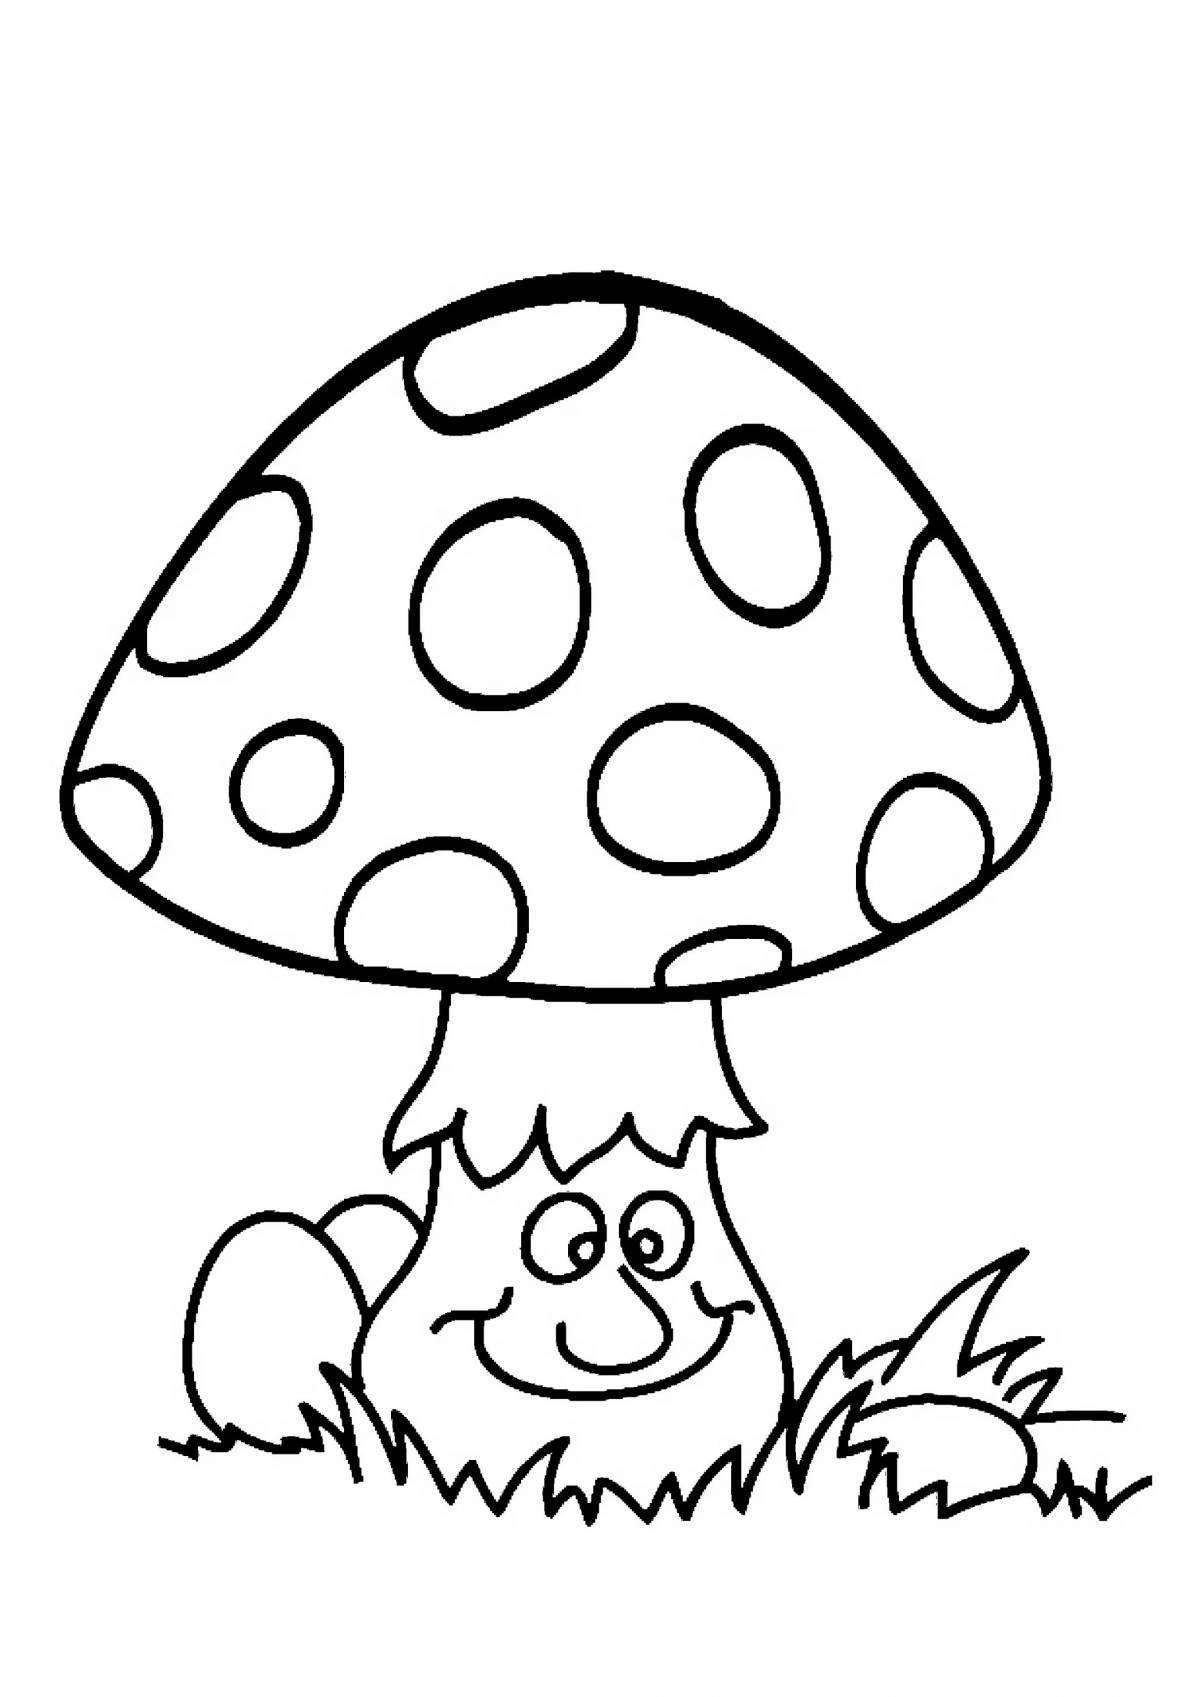 Coloring elegant fly agaric